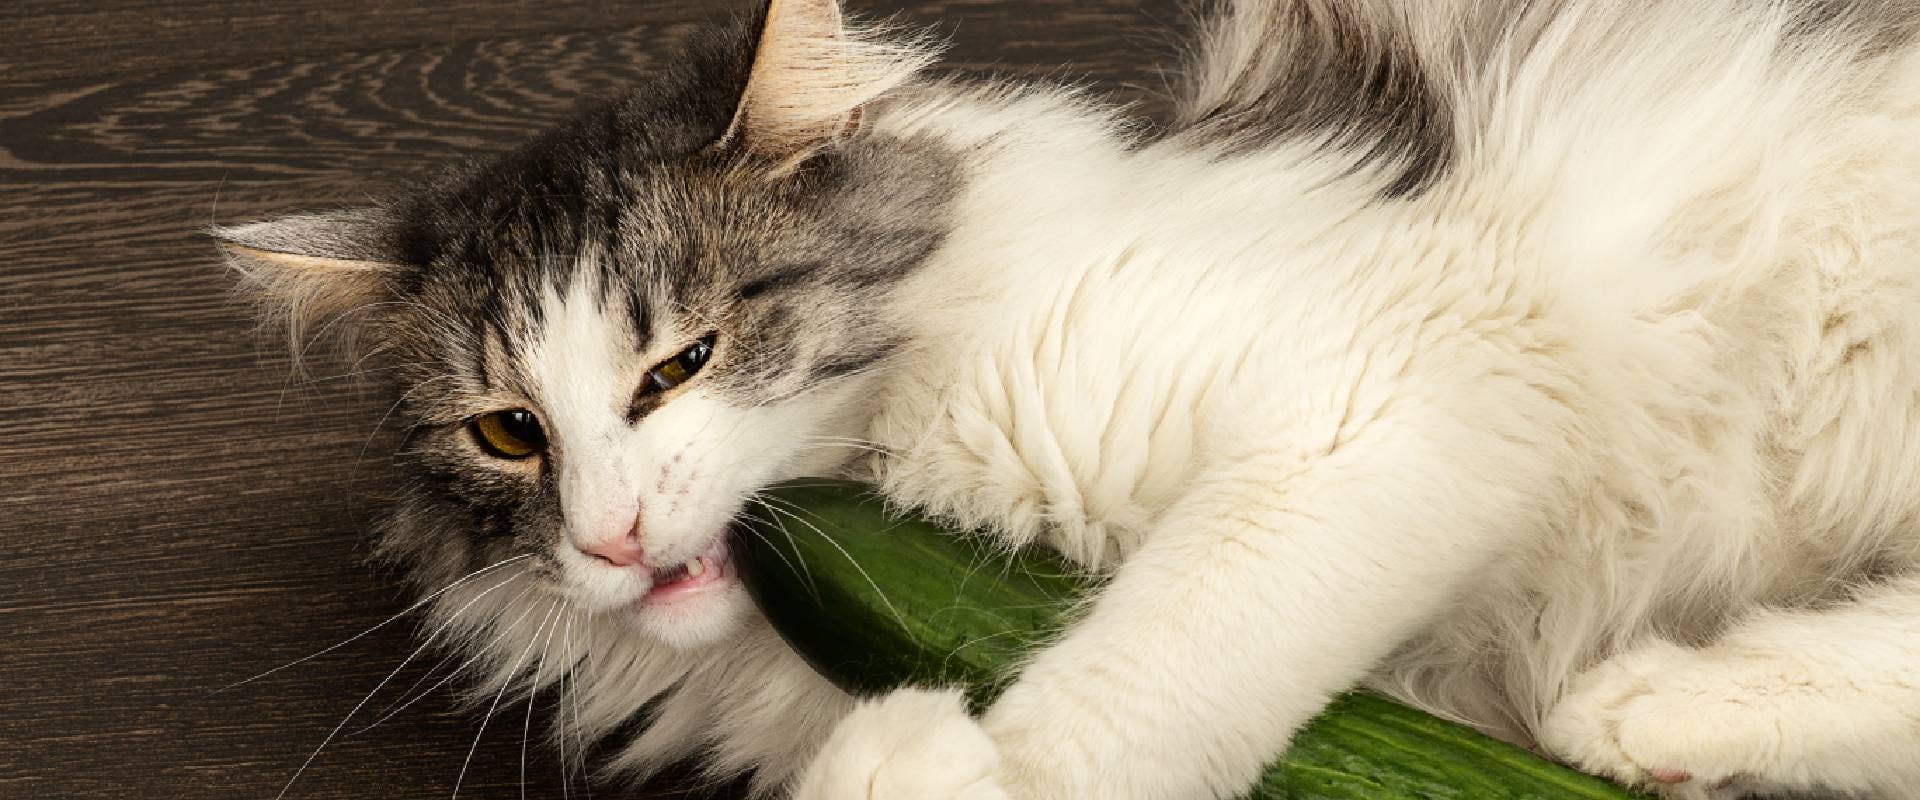 Cat gnawing on a cucumber